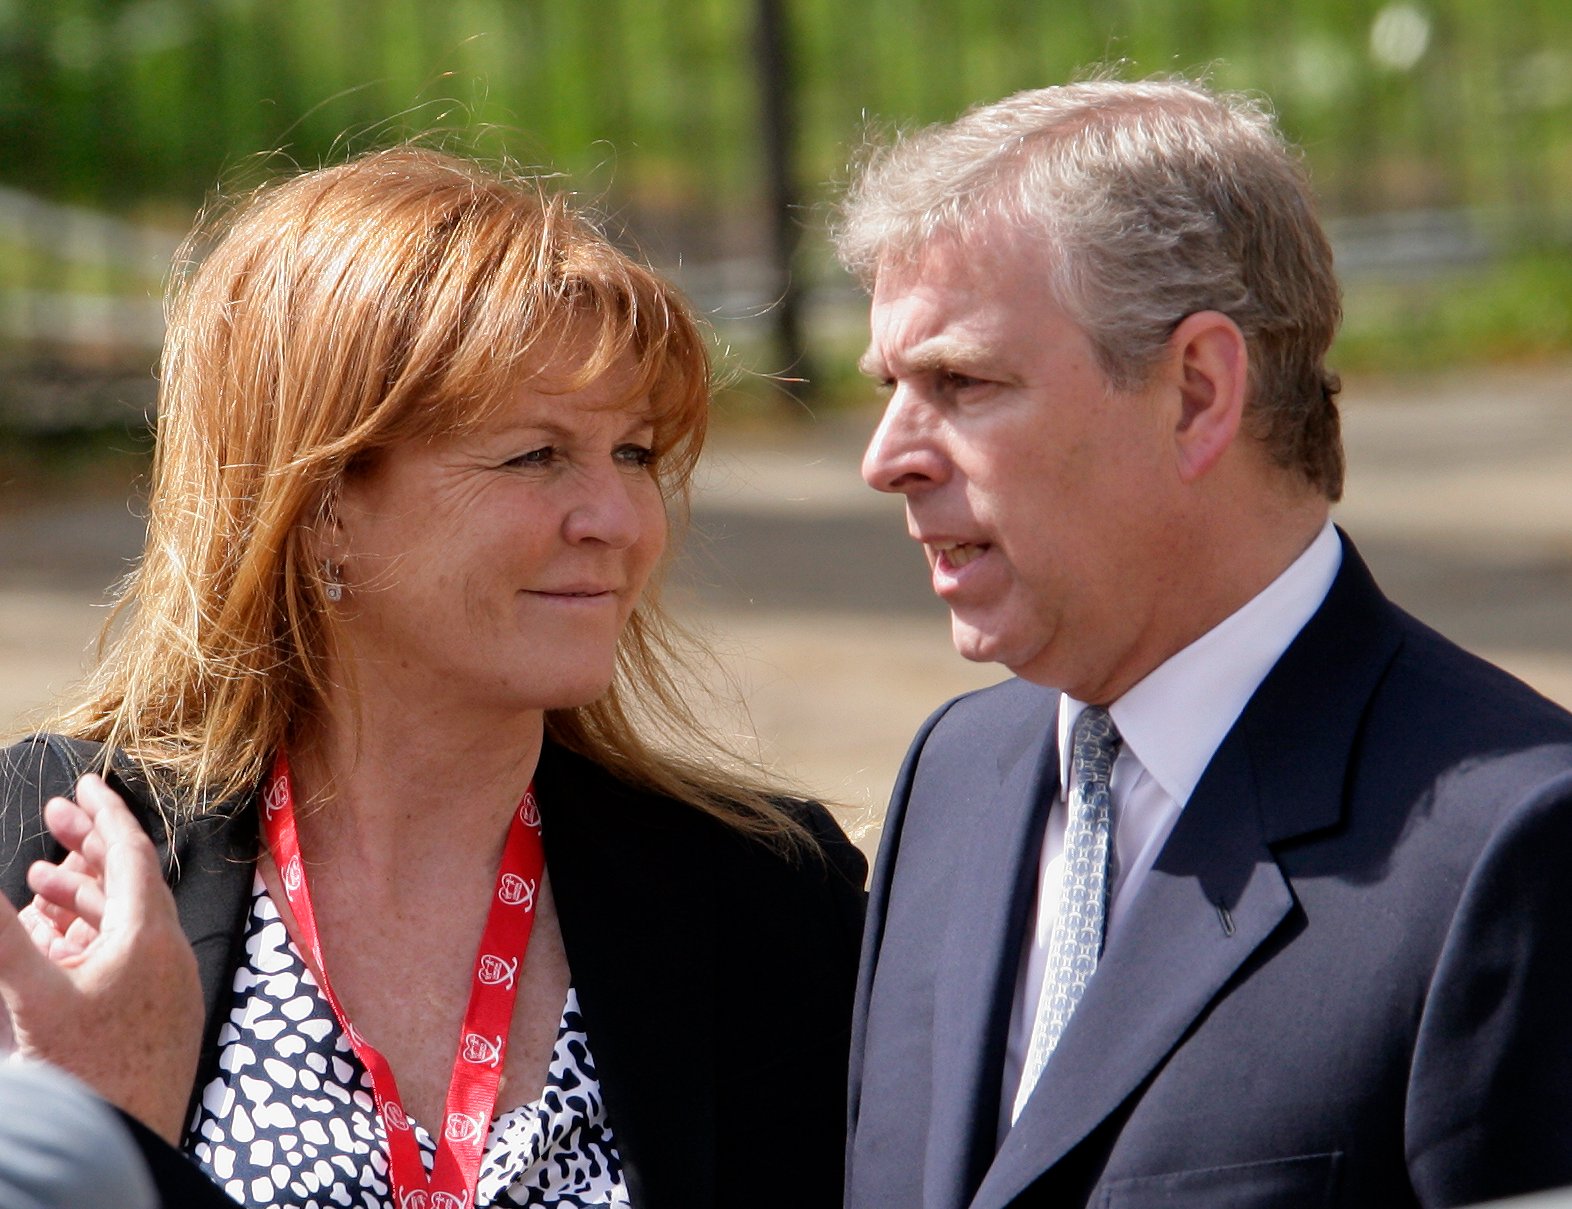 Sarah Ferguson and Prince Andrew waiting for their daughter, Princess Beatrice, to complete the Virgin London Marathon